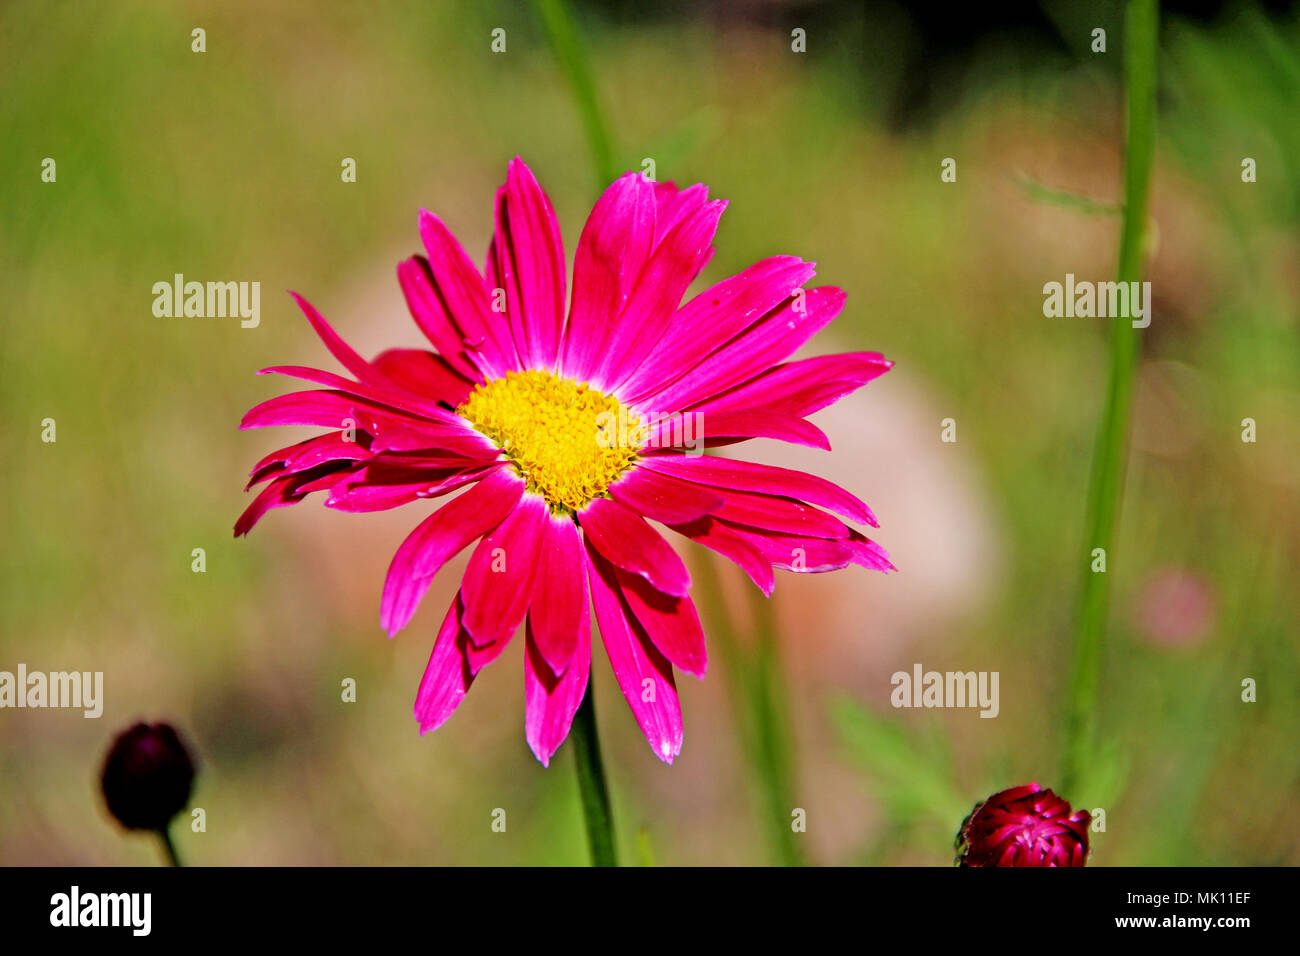 Bright beautiful flower with red petals and yellow core shining under the sun and its shadow Stock Photo